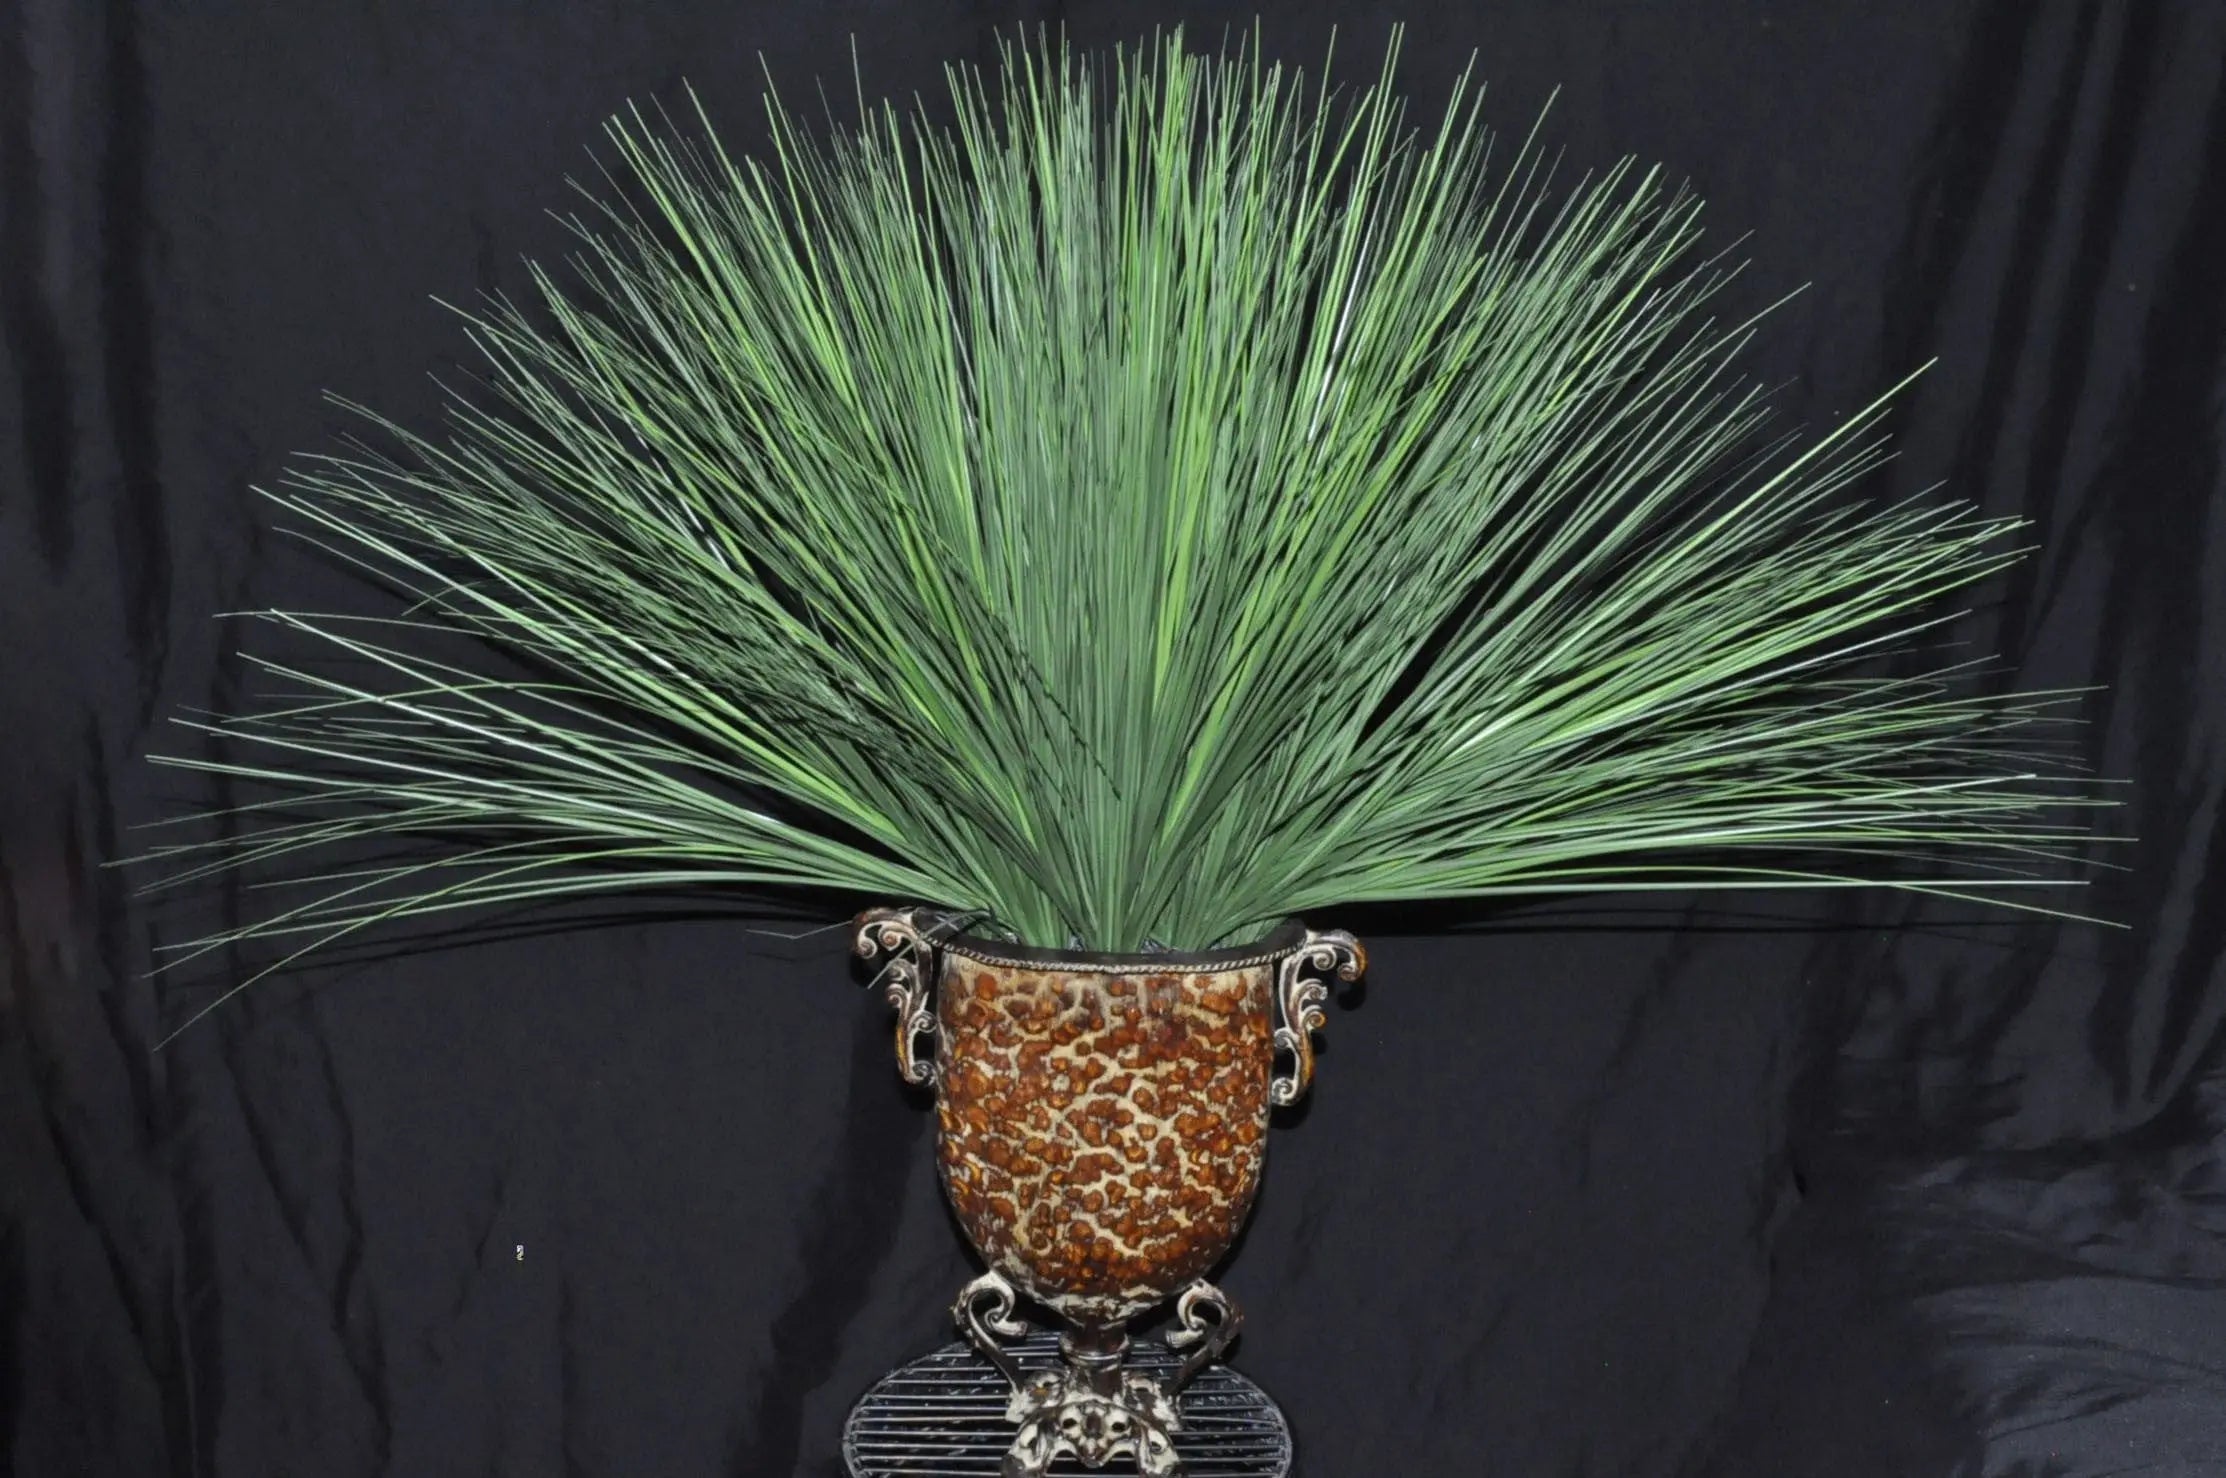 Artificial PVC Onion Grass Arranged in a Decorative Metal Container Silk Plants Canada